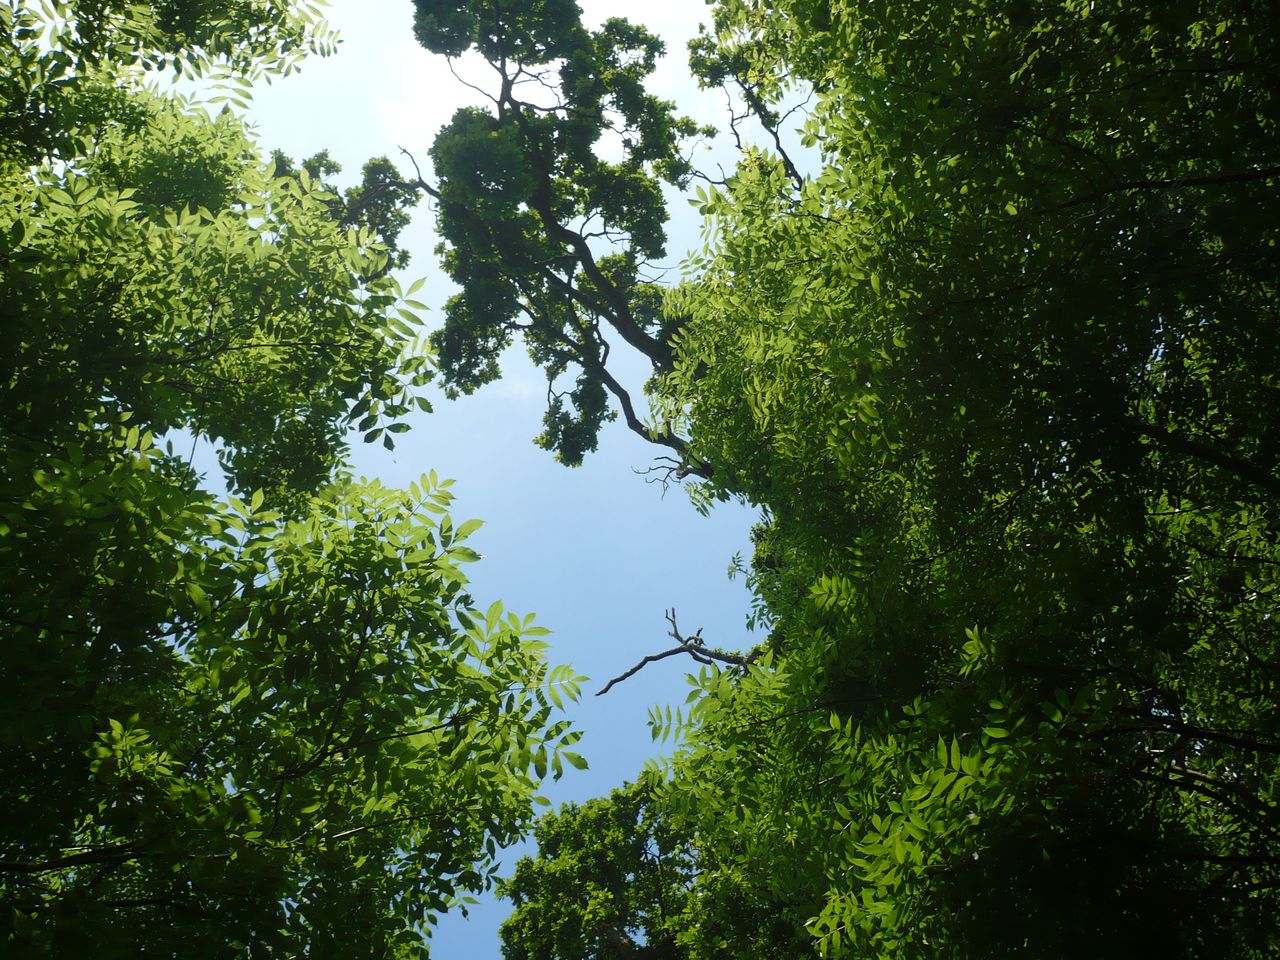 looking up at trees and foliage through the canopy of them